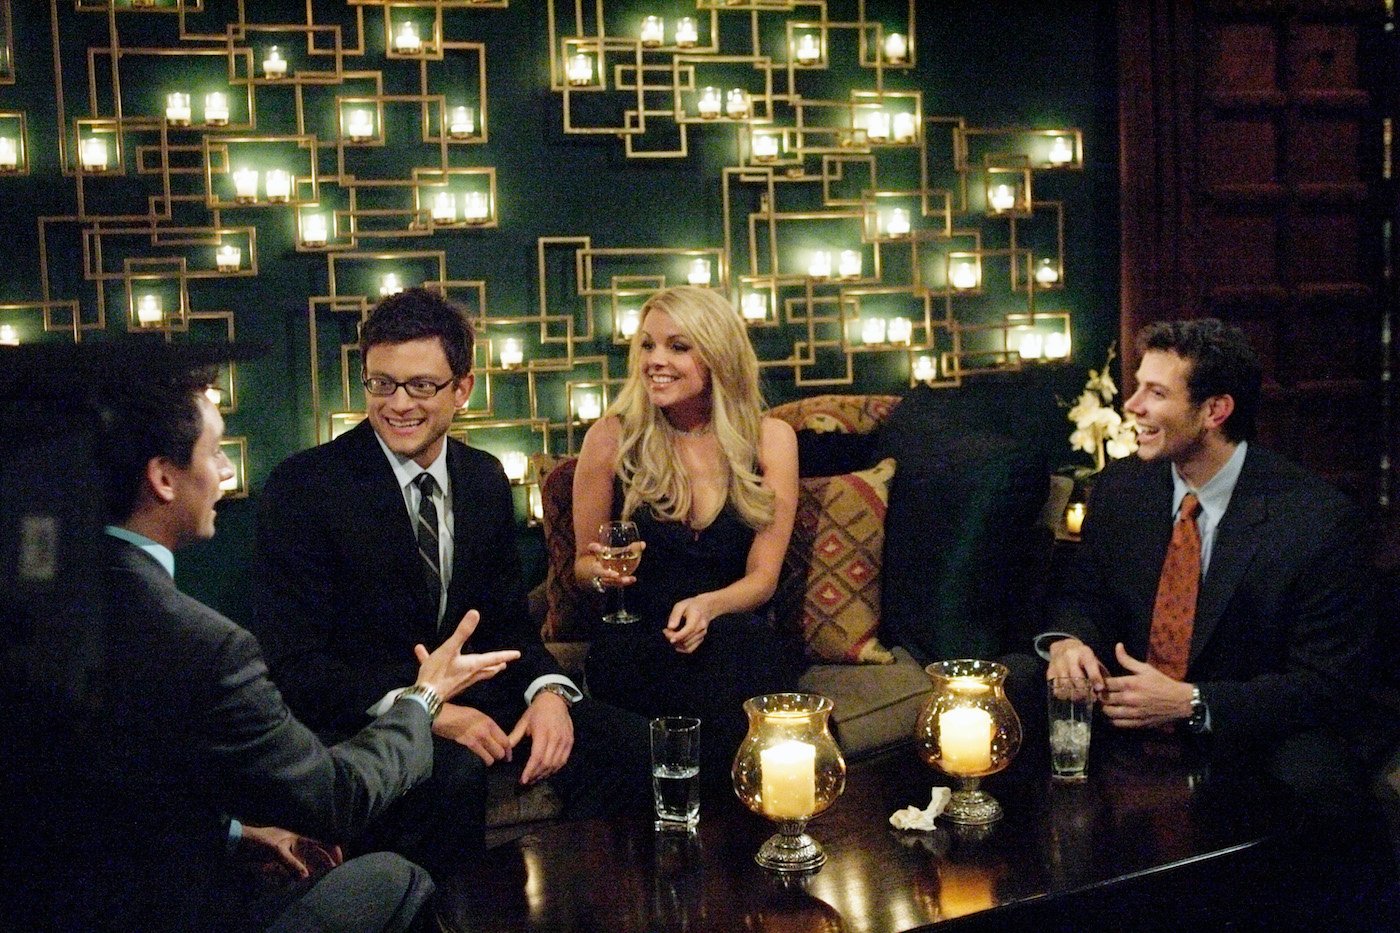 Ali Fedotowsky sits on a couch surrounded by three men wearing suits